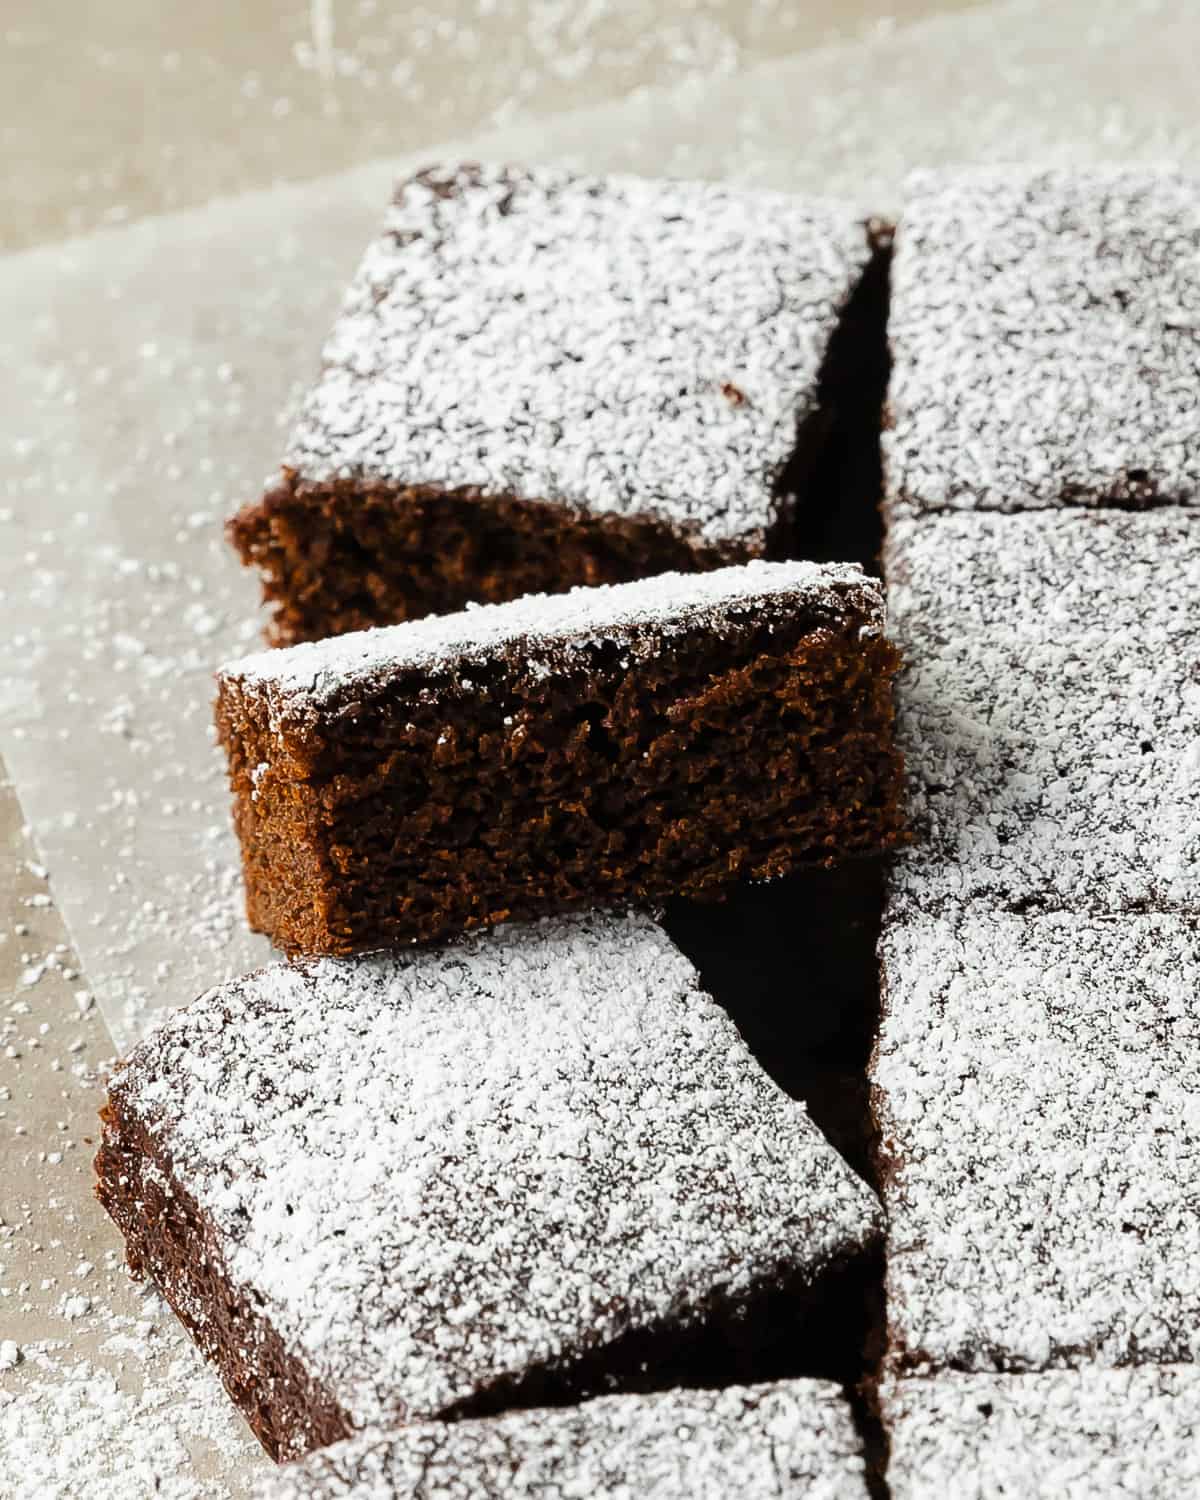 Molasses cake is a deliciously rich, tender and moist cake filled with molasses, a touch bright lemon zest and lots of cozy warming spices. Top this old fashioned molasses cake with a dusting of powdered sugar for the perfect simple, easy to make and festive cake.